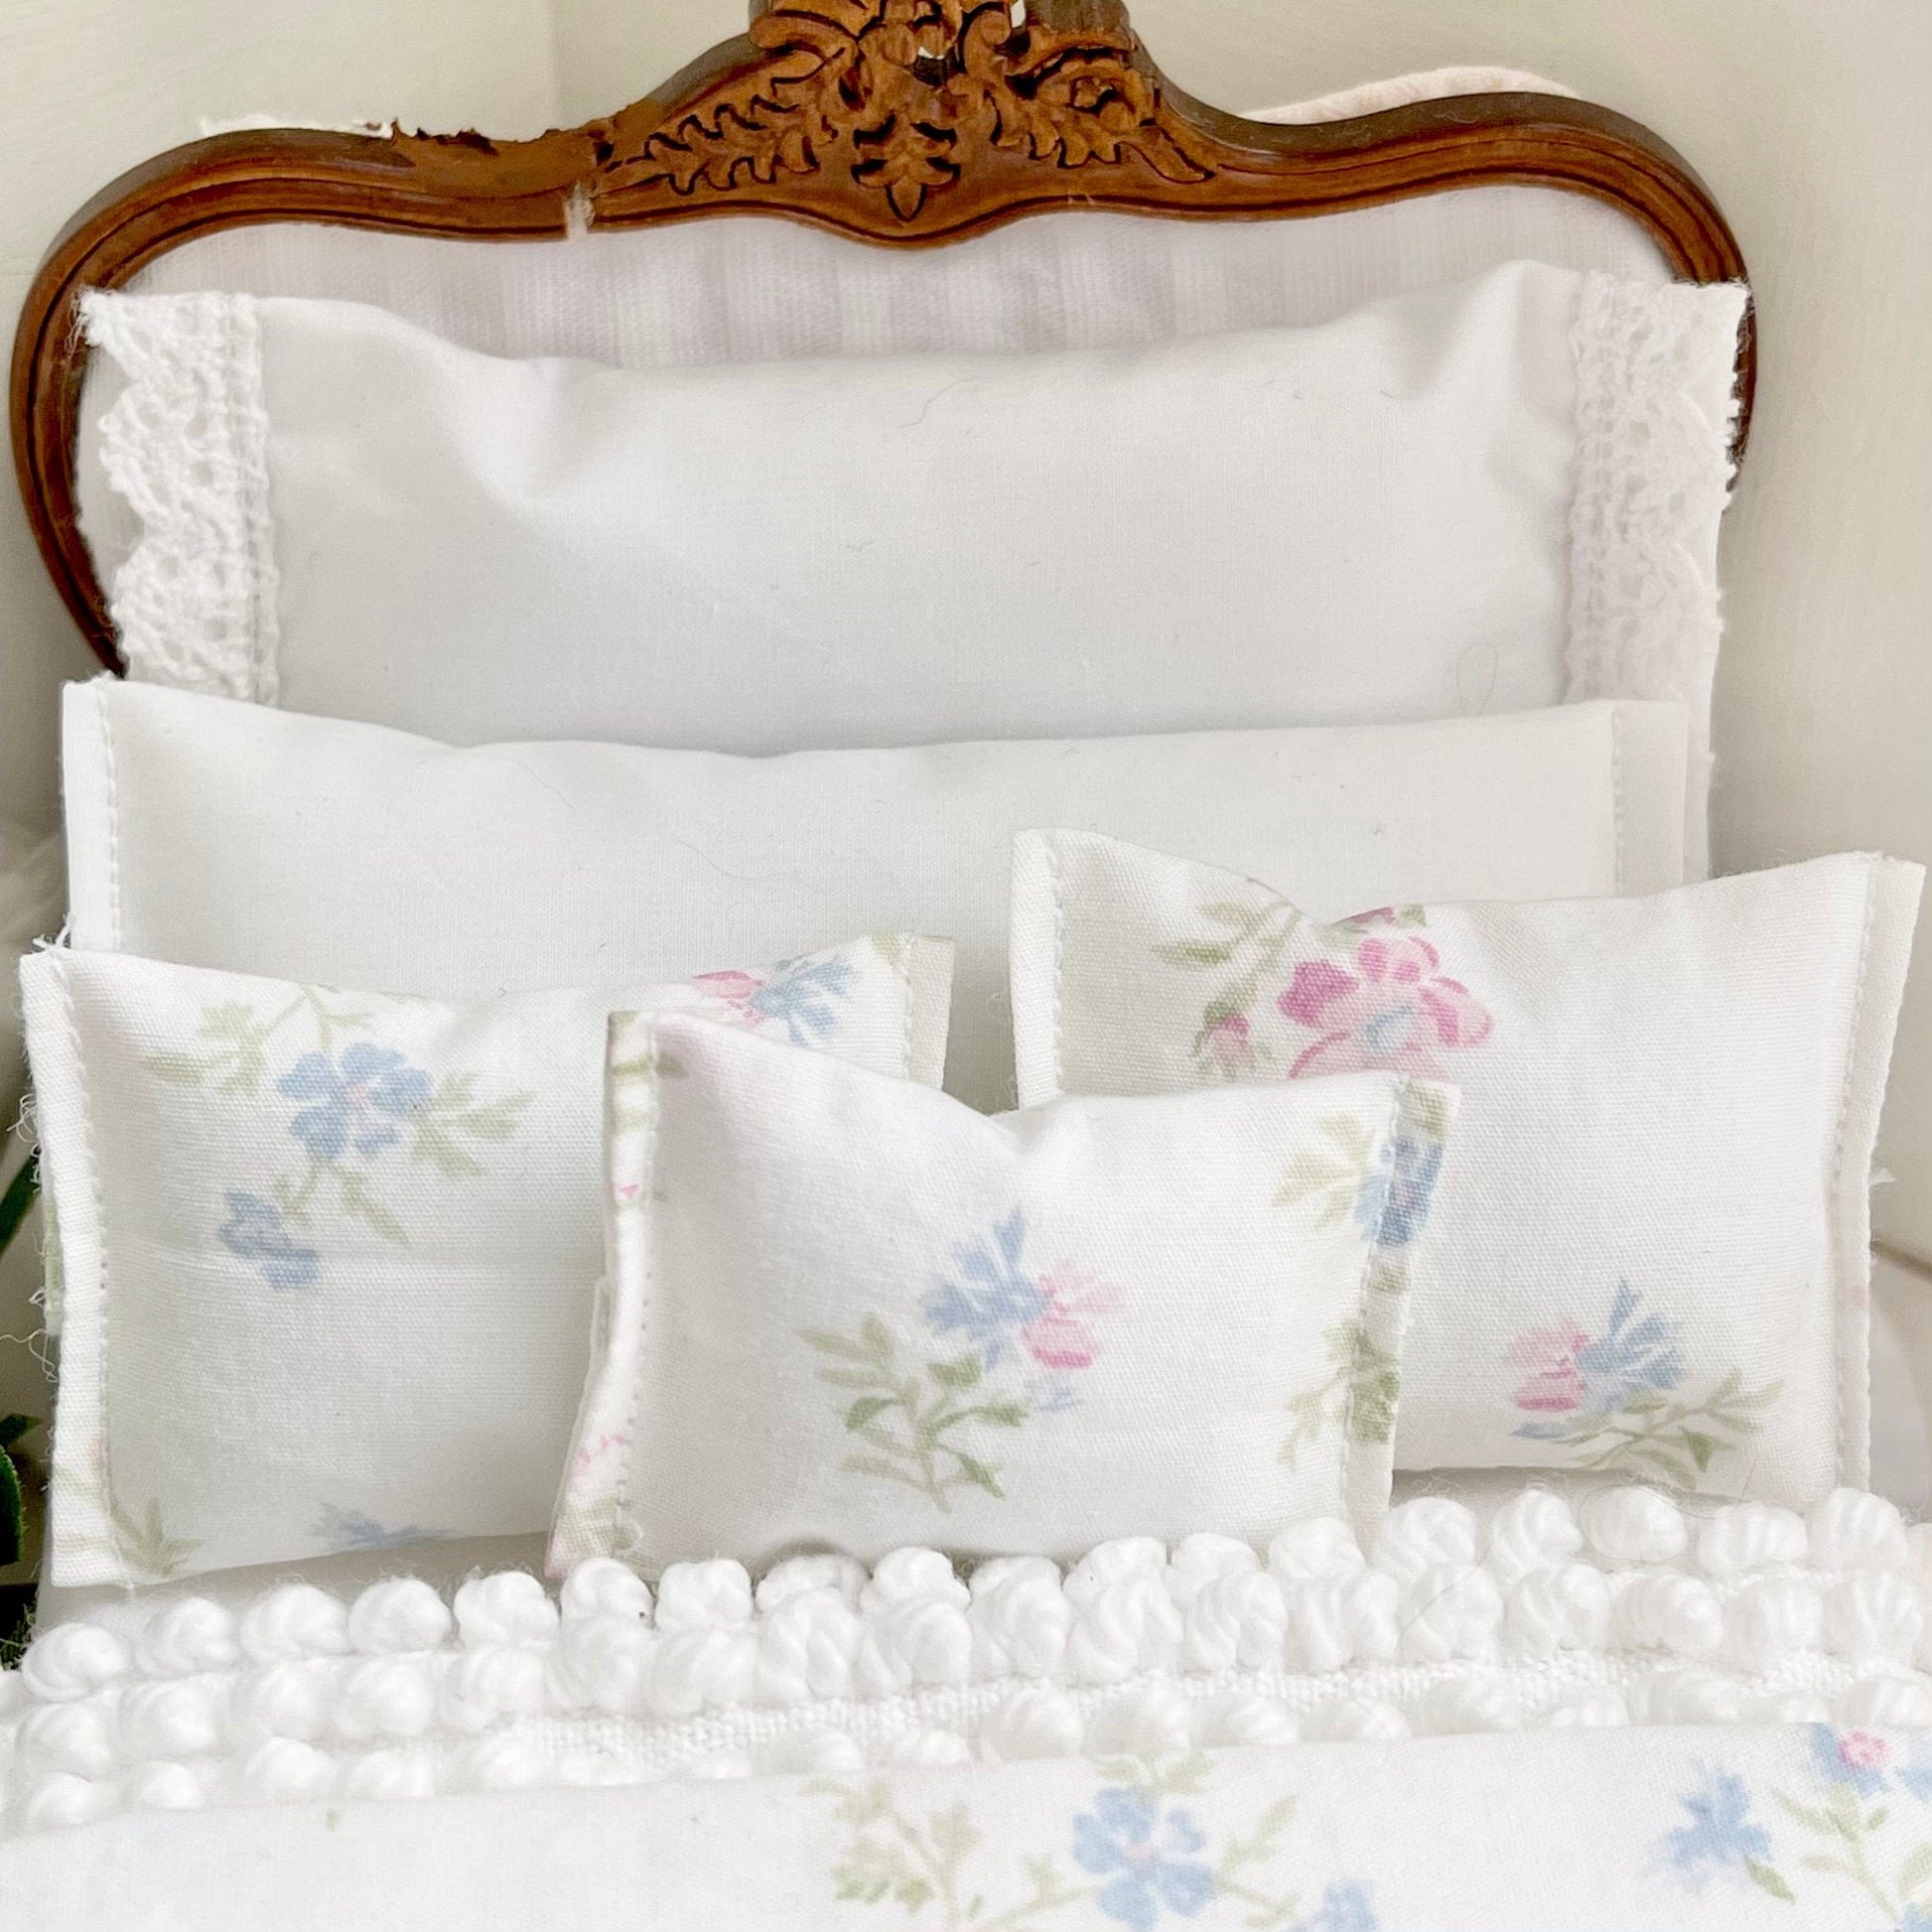 Chantallena Doll House Shabby Cottage -  Eight Piece White Cotton Bedding Set with Pink & Blue Wildflowers Bed Runner